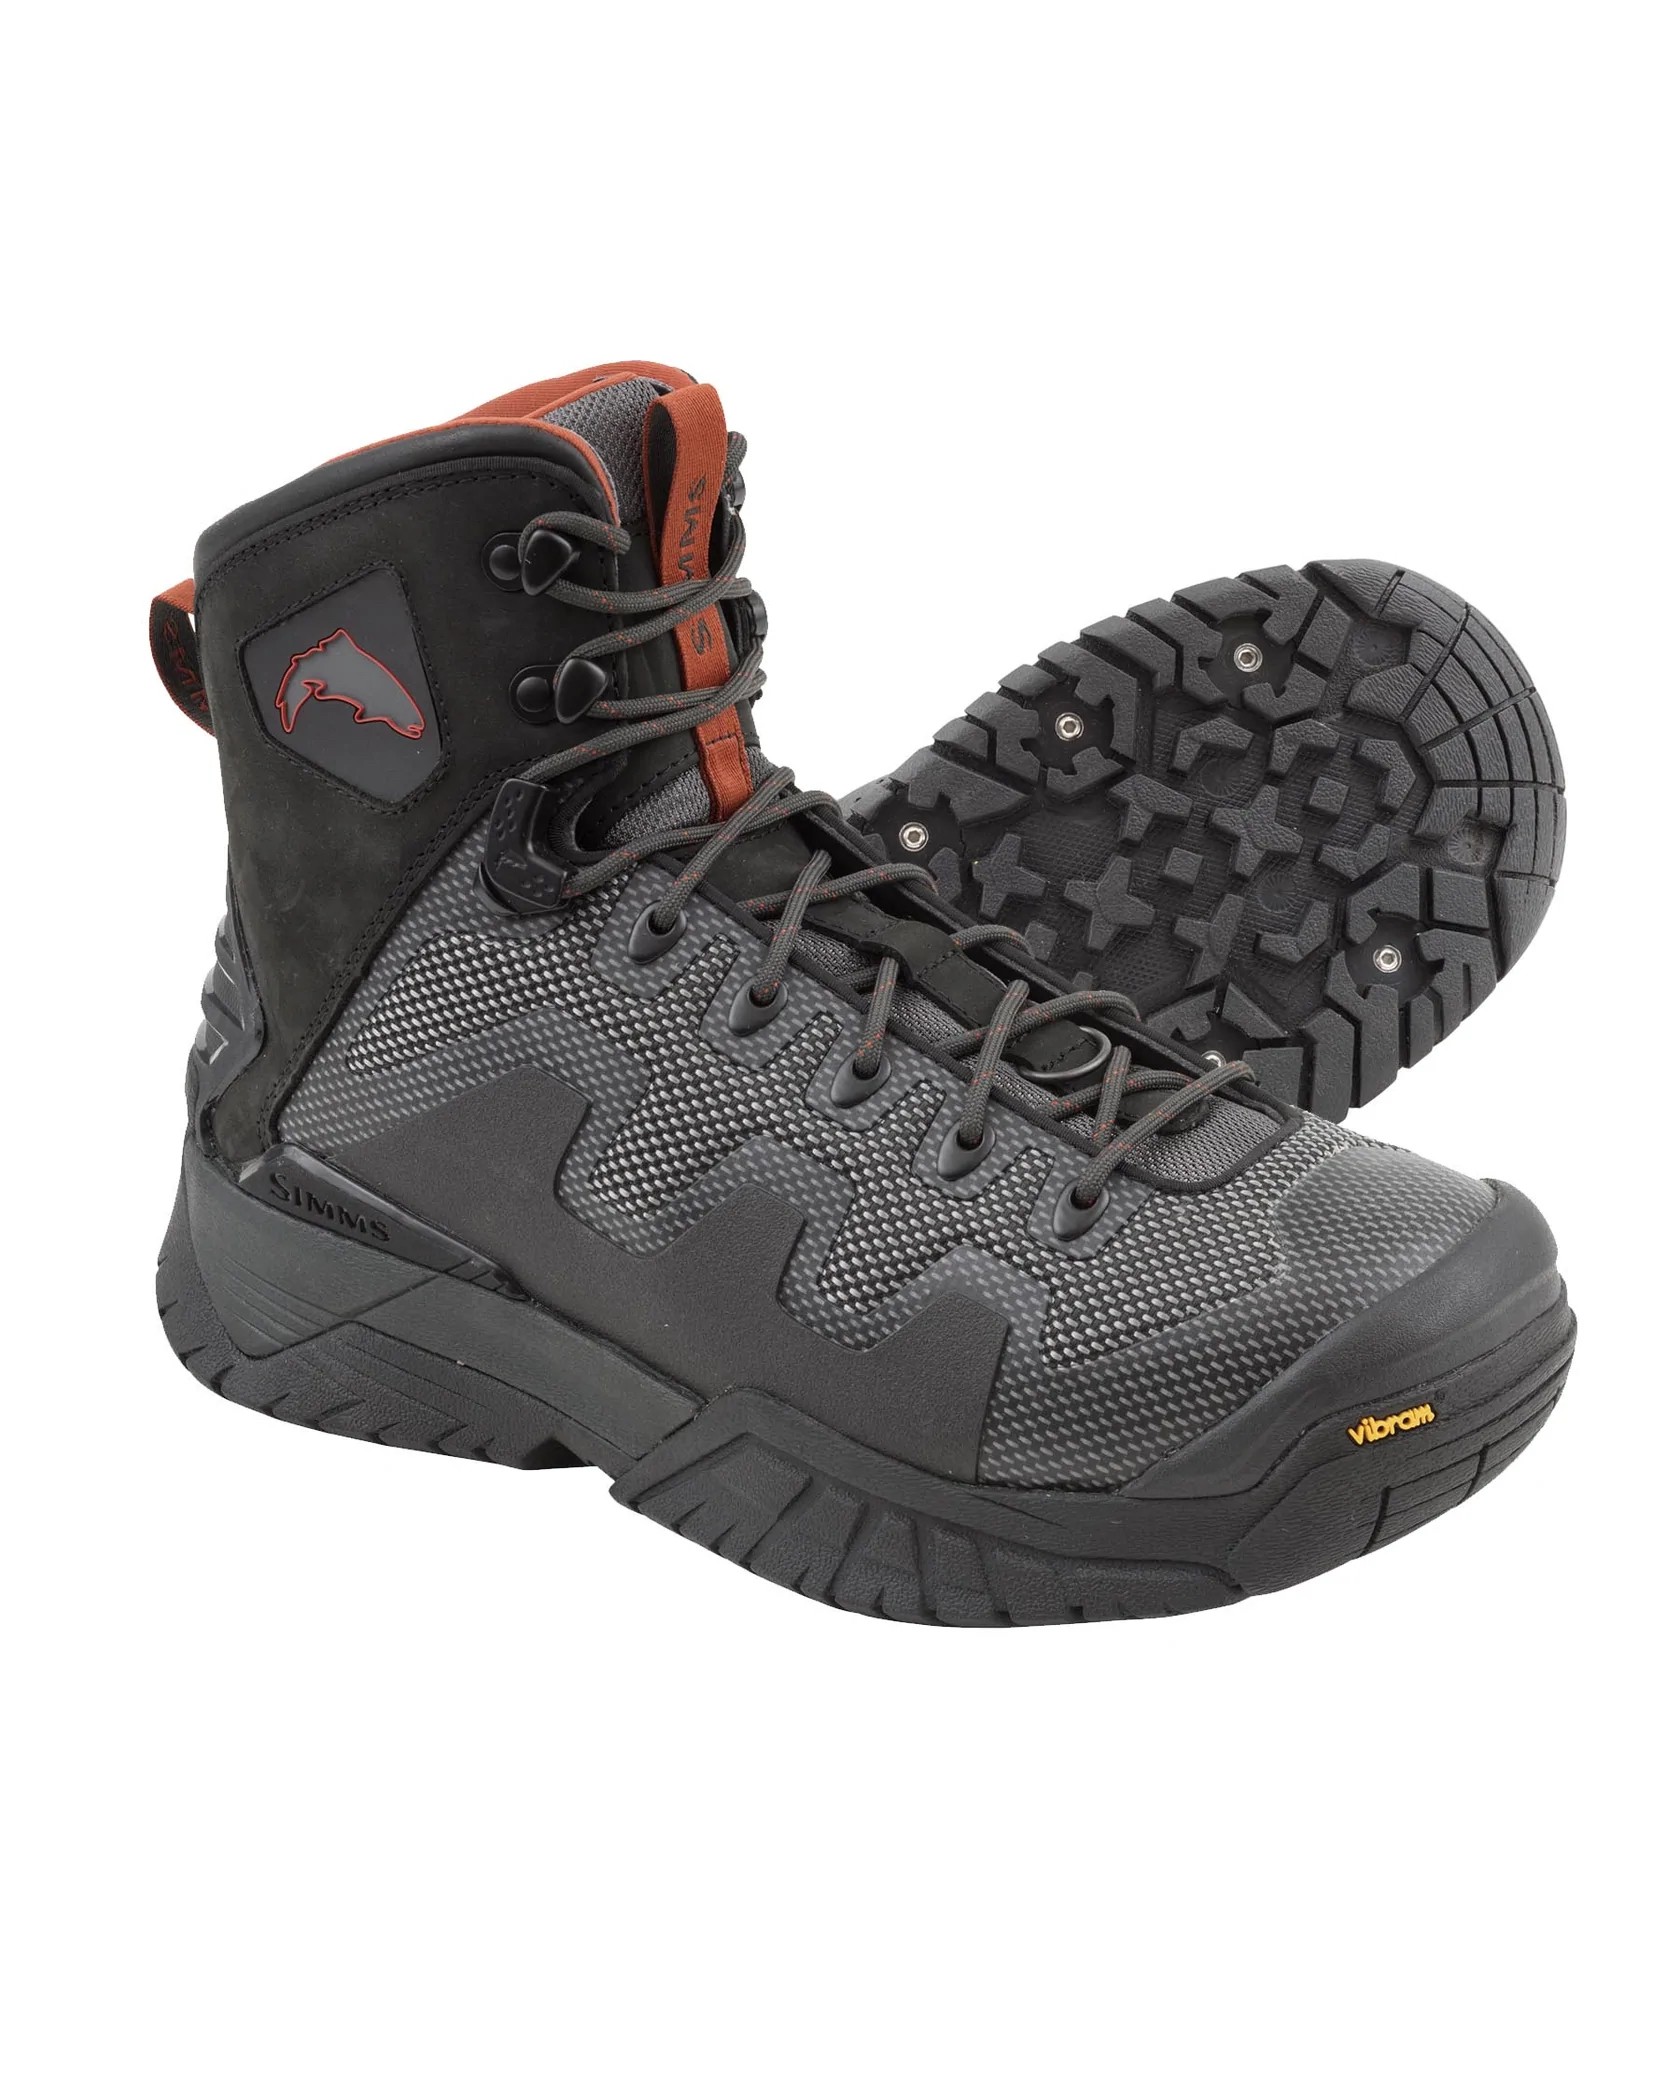 CLEARANCE SALE! - Simms - M's G4 PRO Wading Boot - Vibram - SAVE 20%!